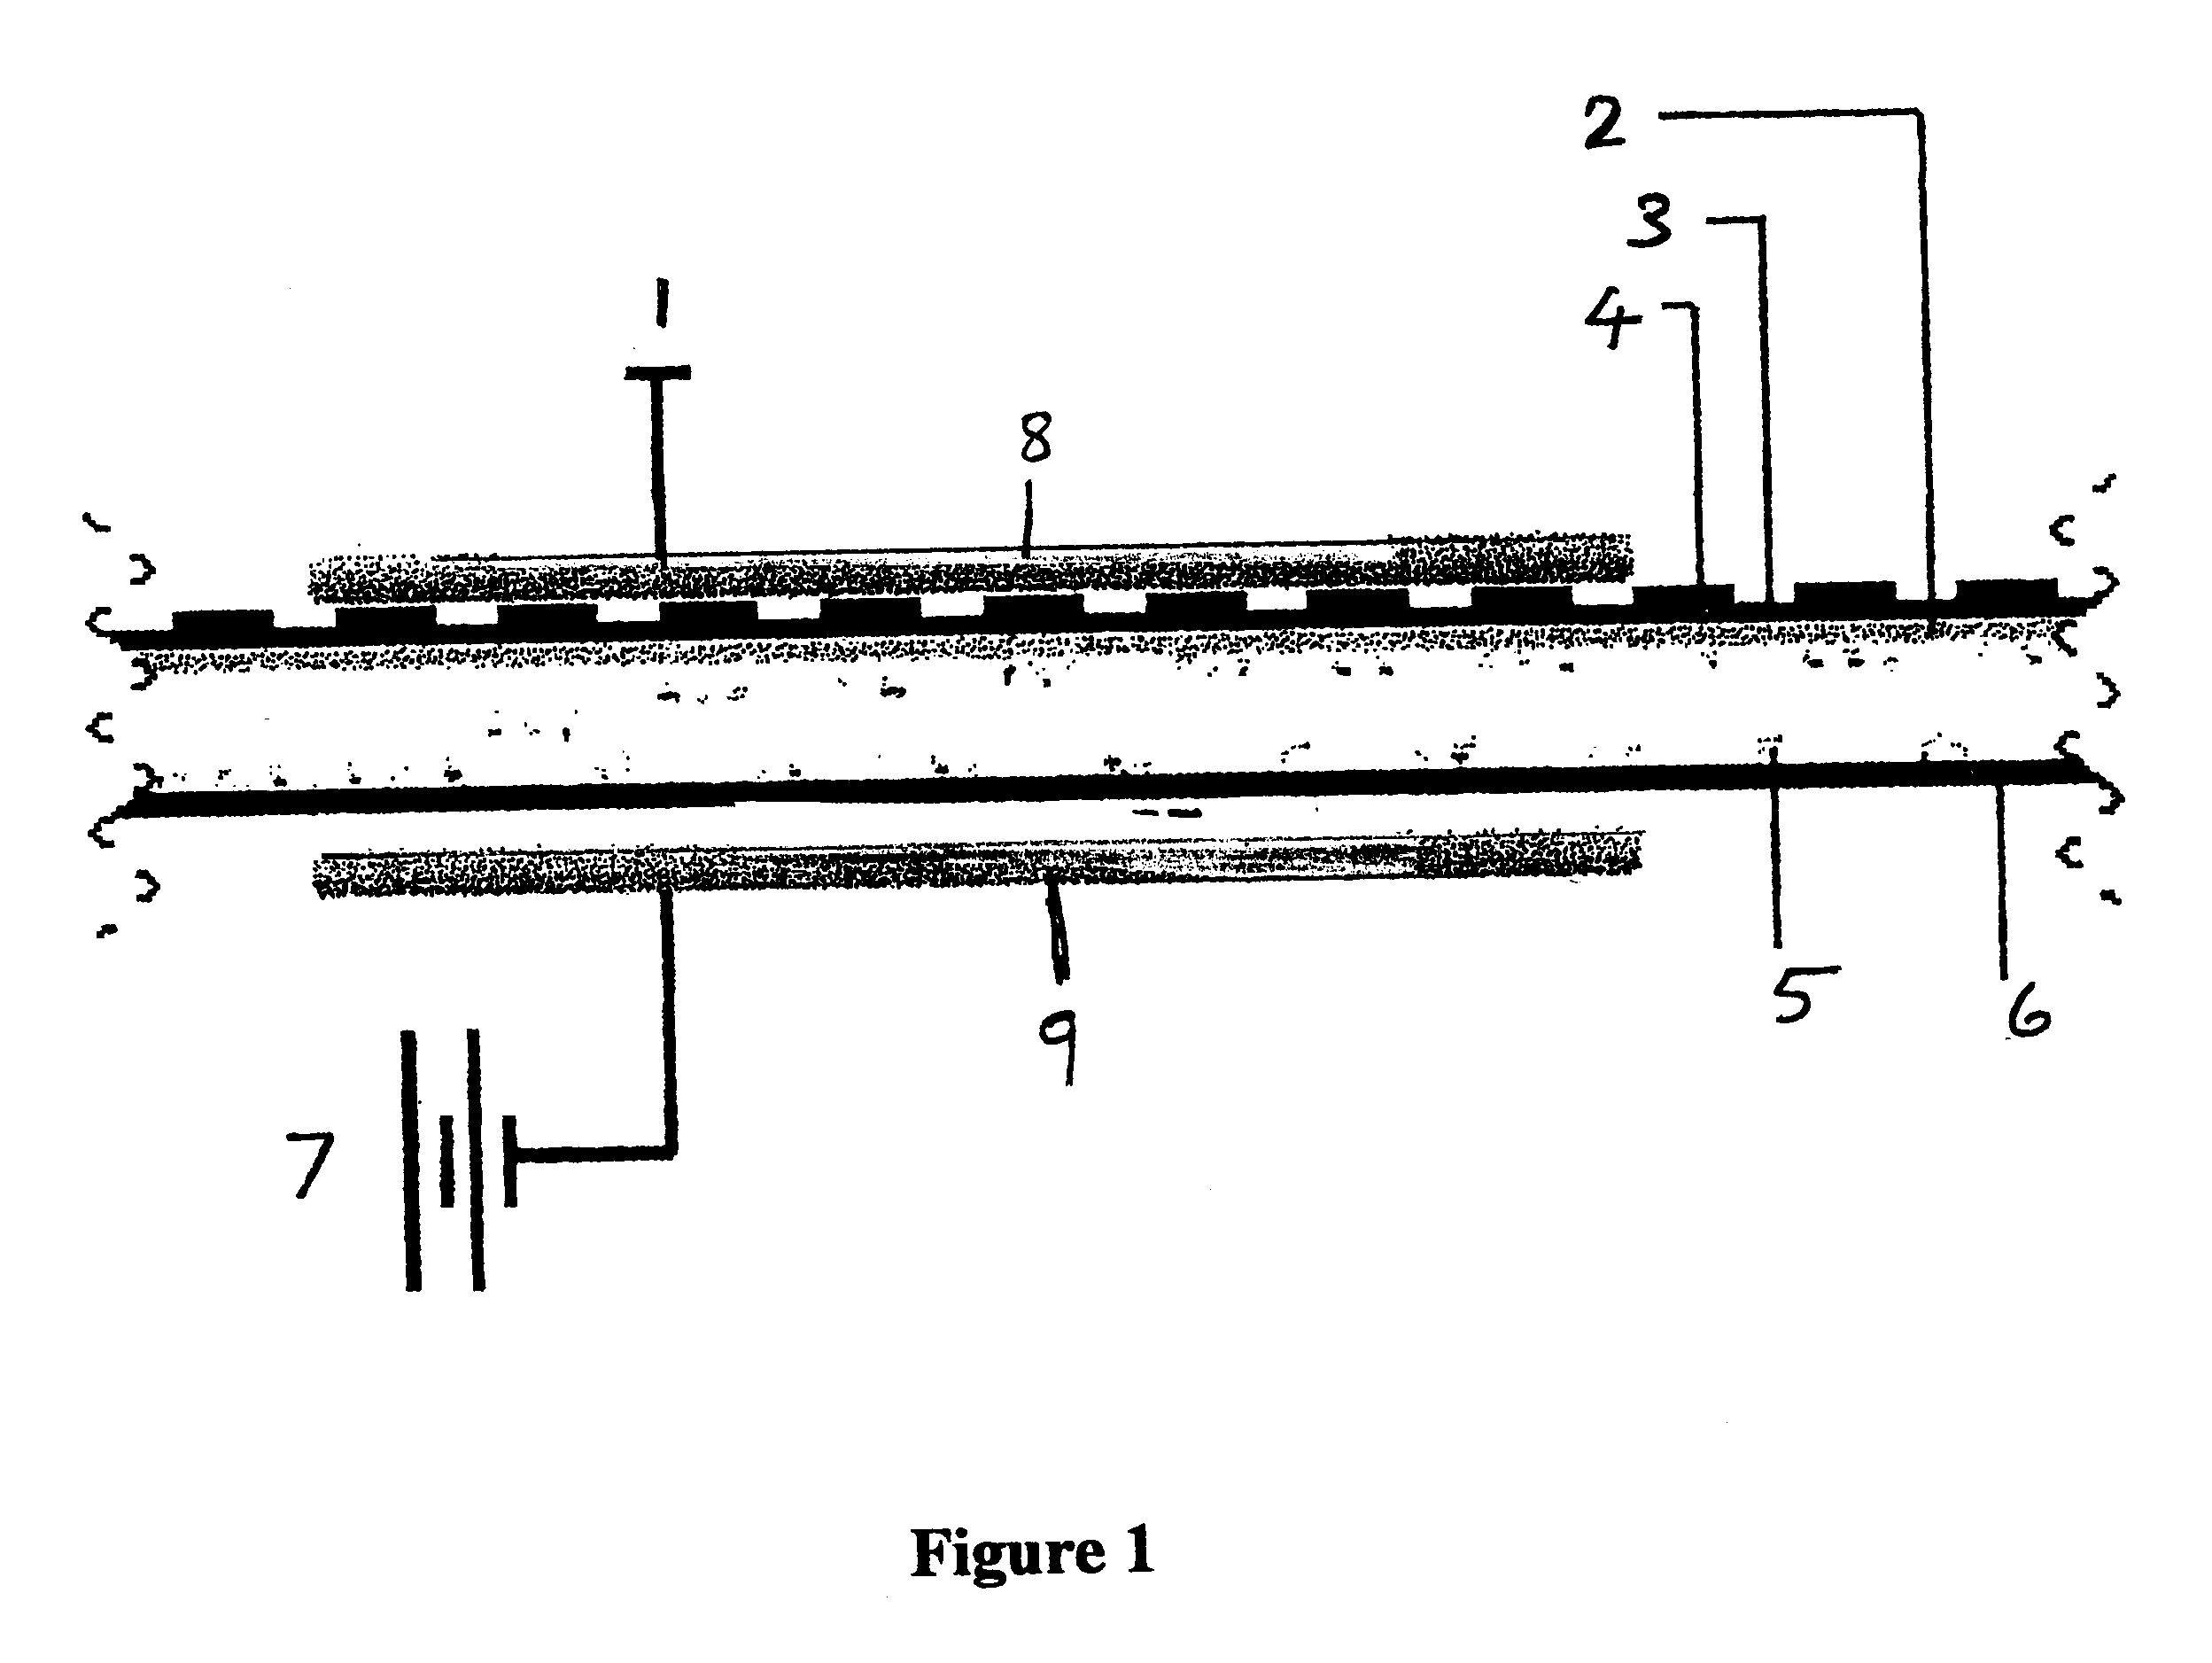 Production of patterned coated abrasive surfaces